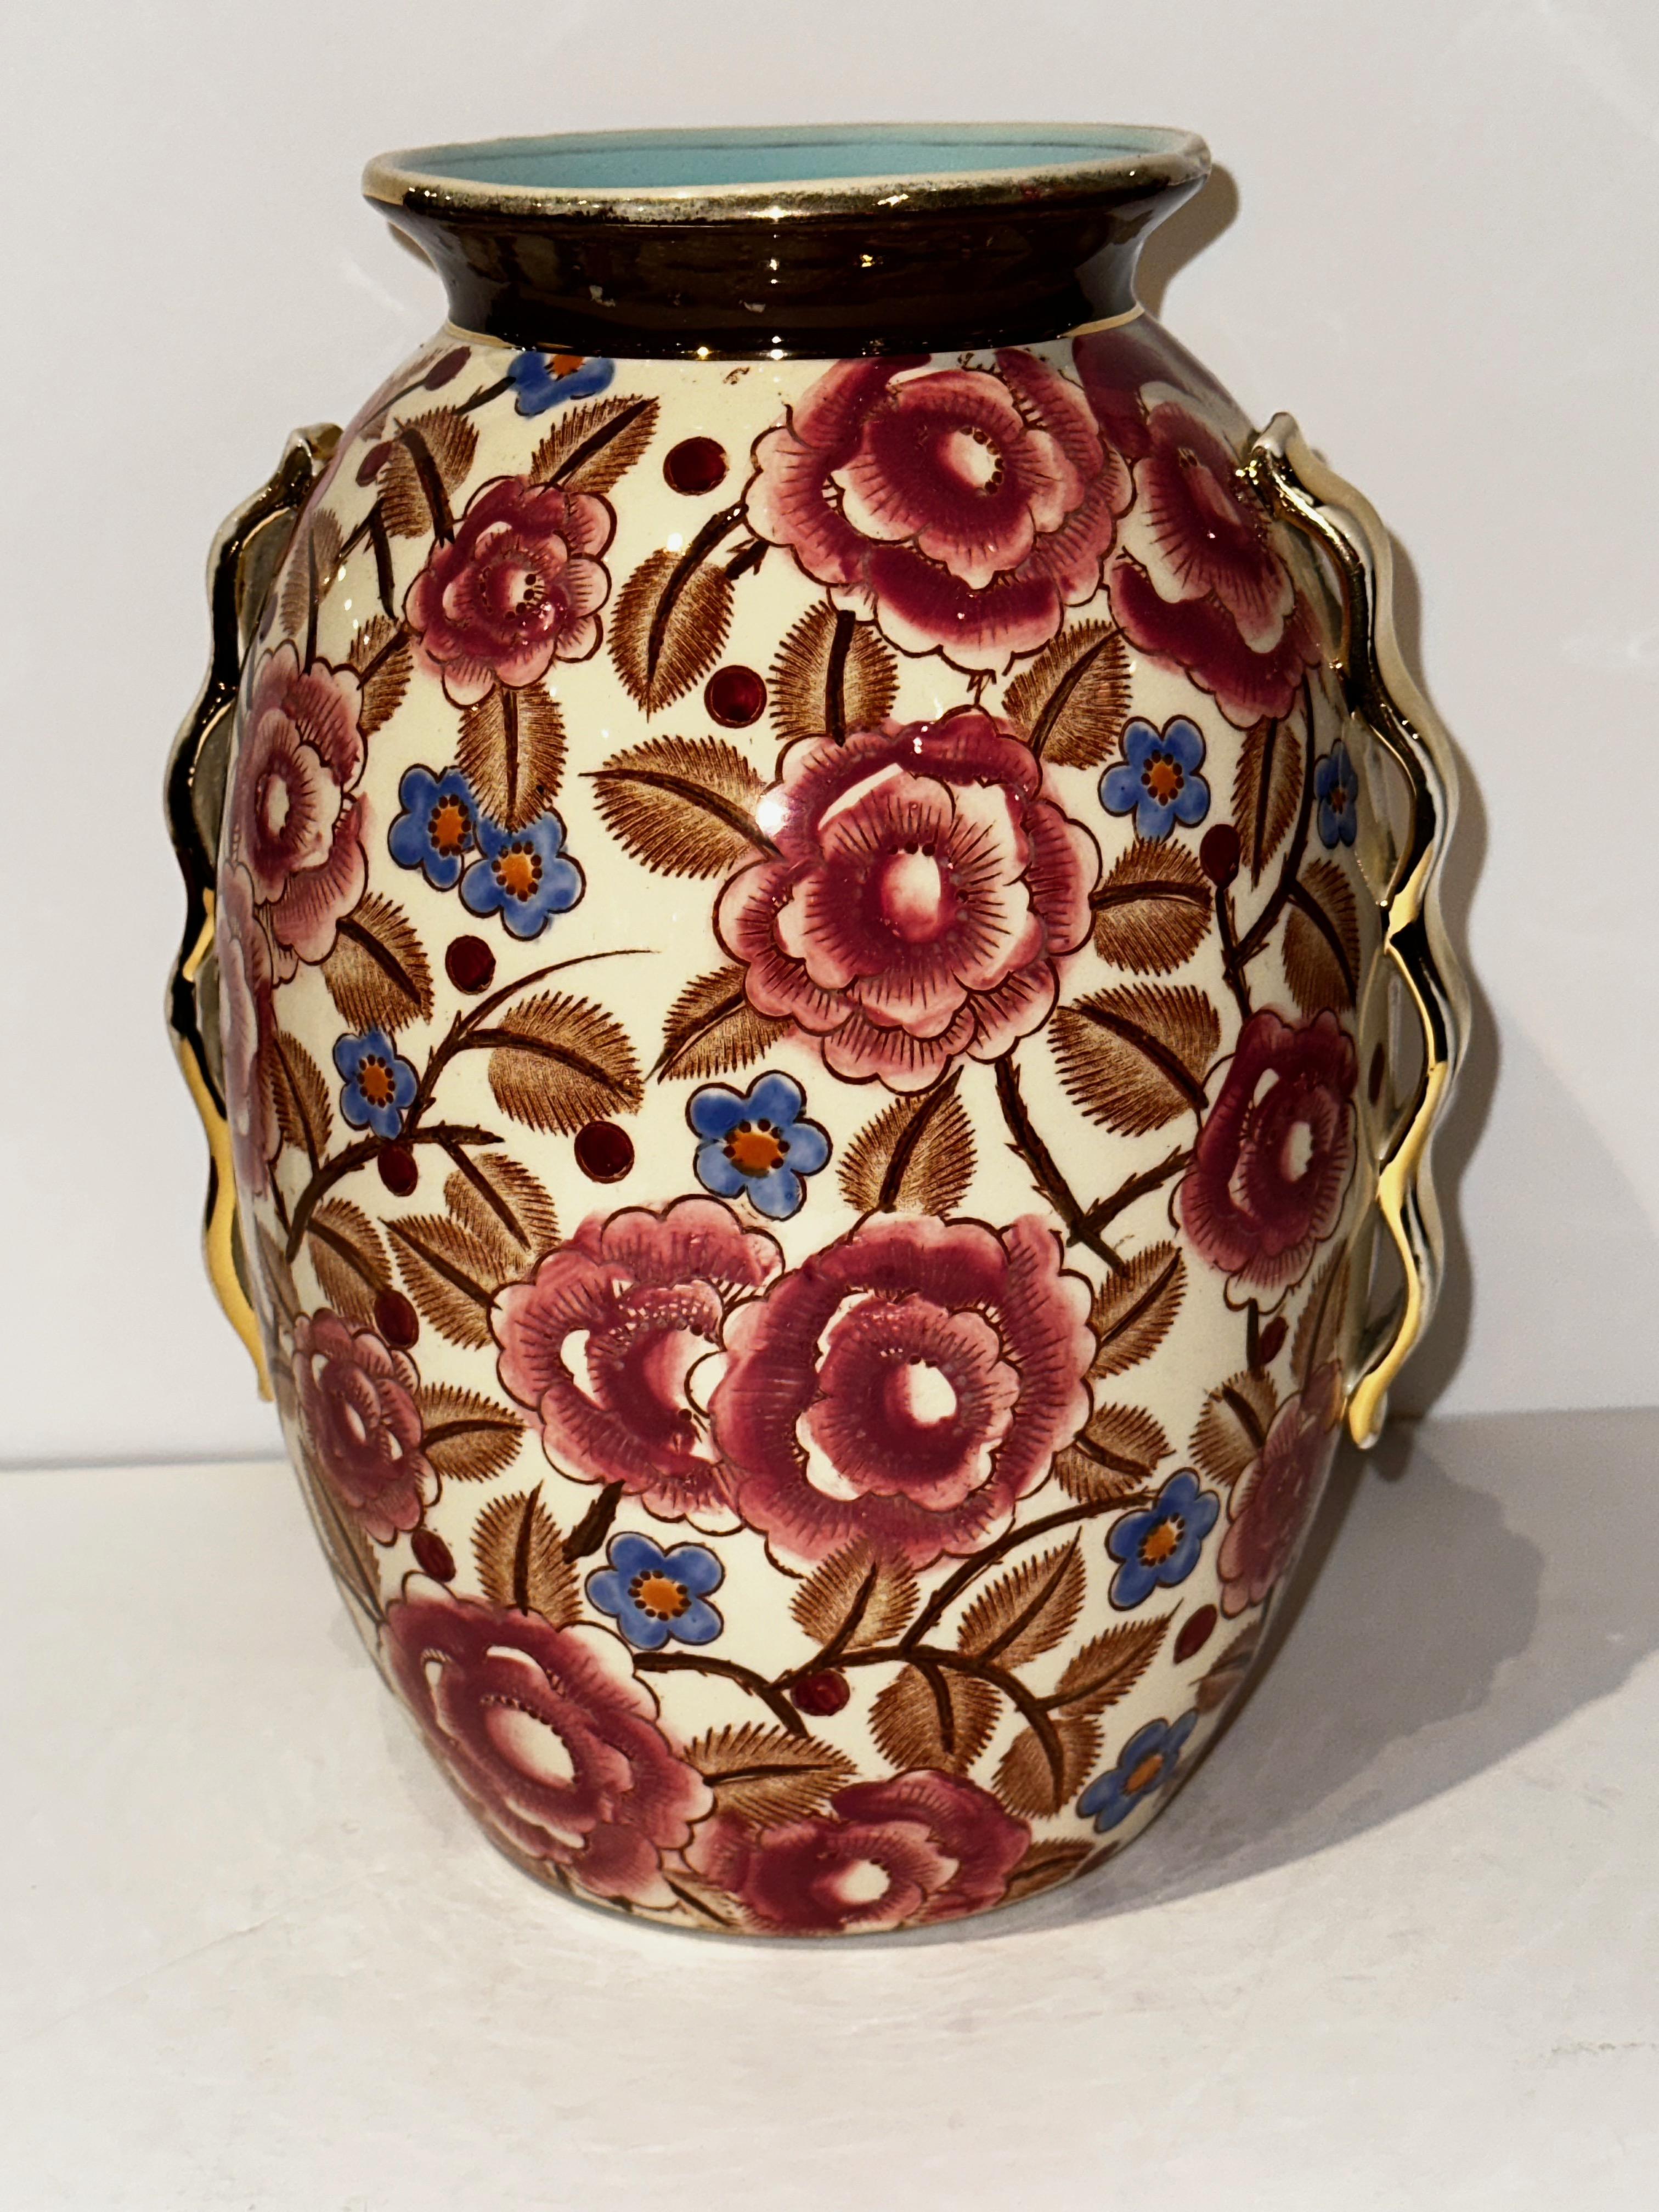 Art Deco Vase by Raymond Chevalier for Boch La Louviere Beautiful Floral Design. The colors and the decor are beautifully vibrant and the shape too is very aesthetically pleasing. This fine and rare example of excellently, handcrafted Art Deco